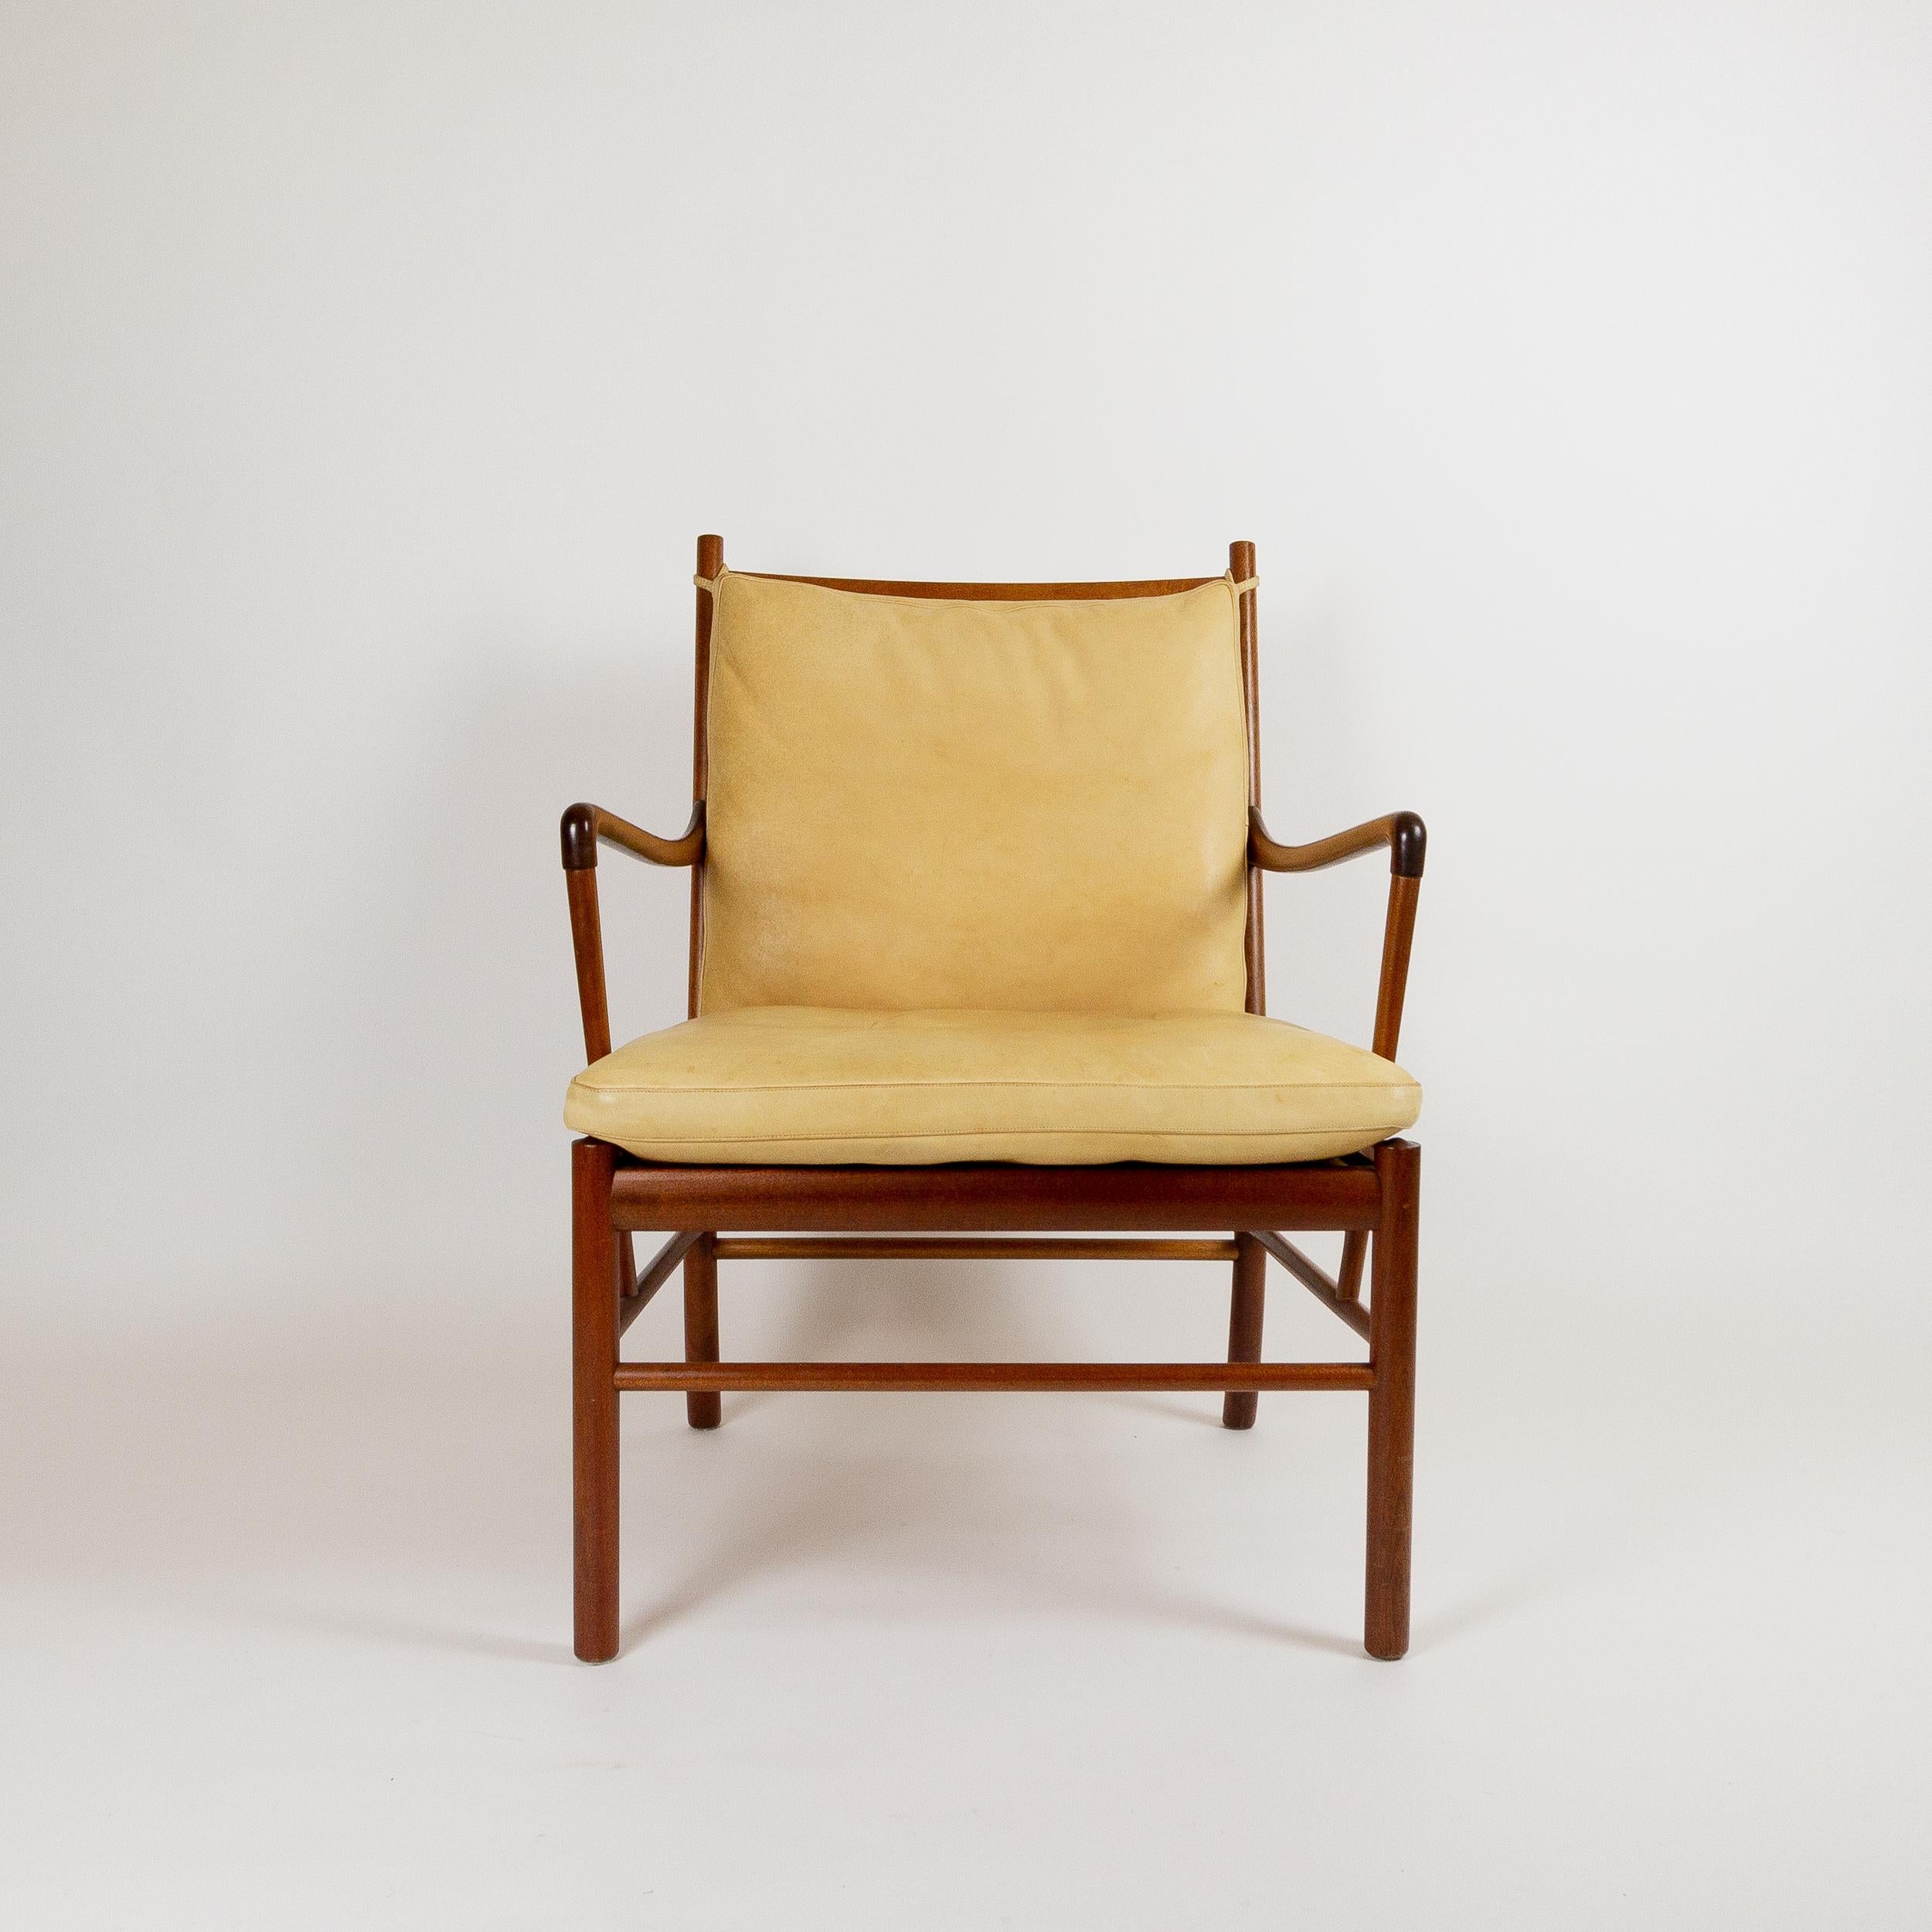 20th Century Mahogany and Cream Leather Colonial Chair by Ole Wanscher for Poul Jeppesen